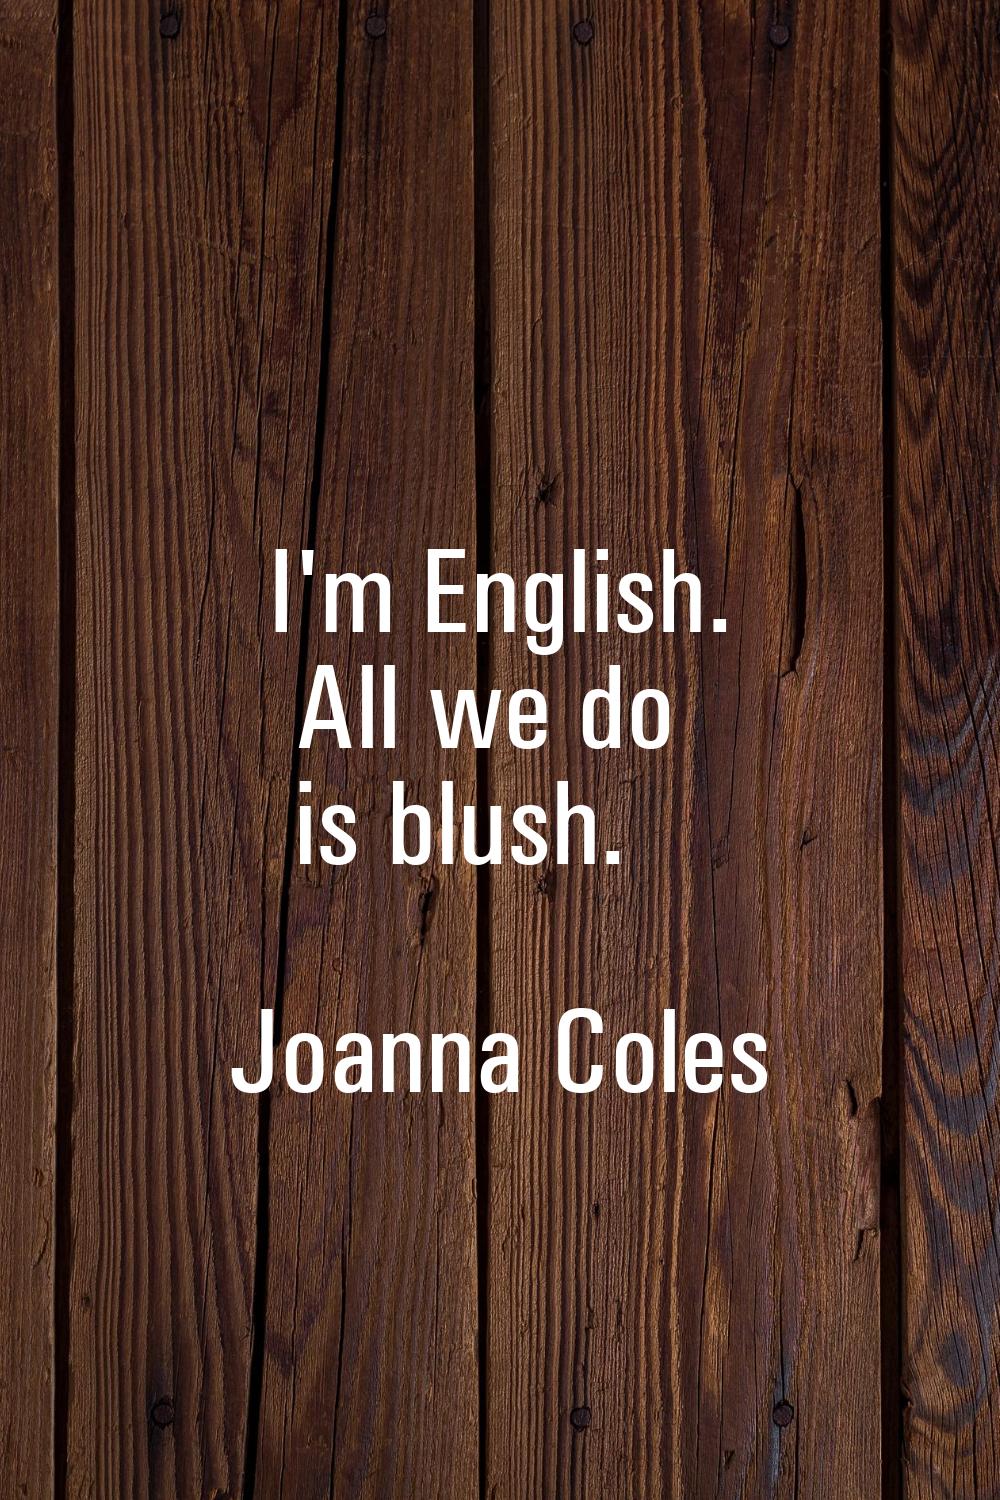 I'm English. All we do is blush.